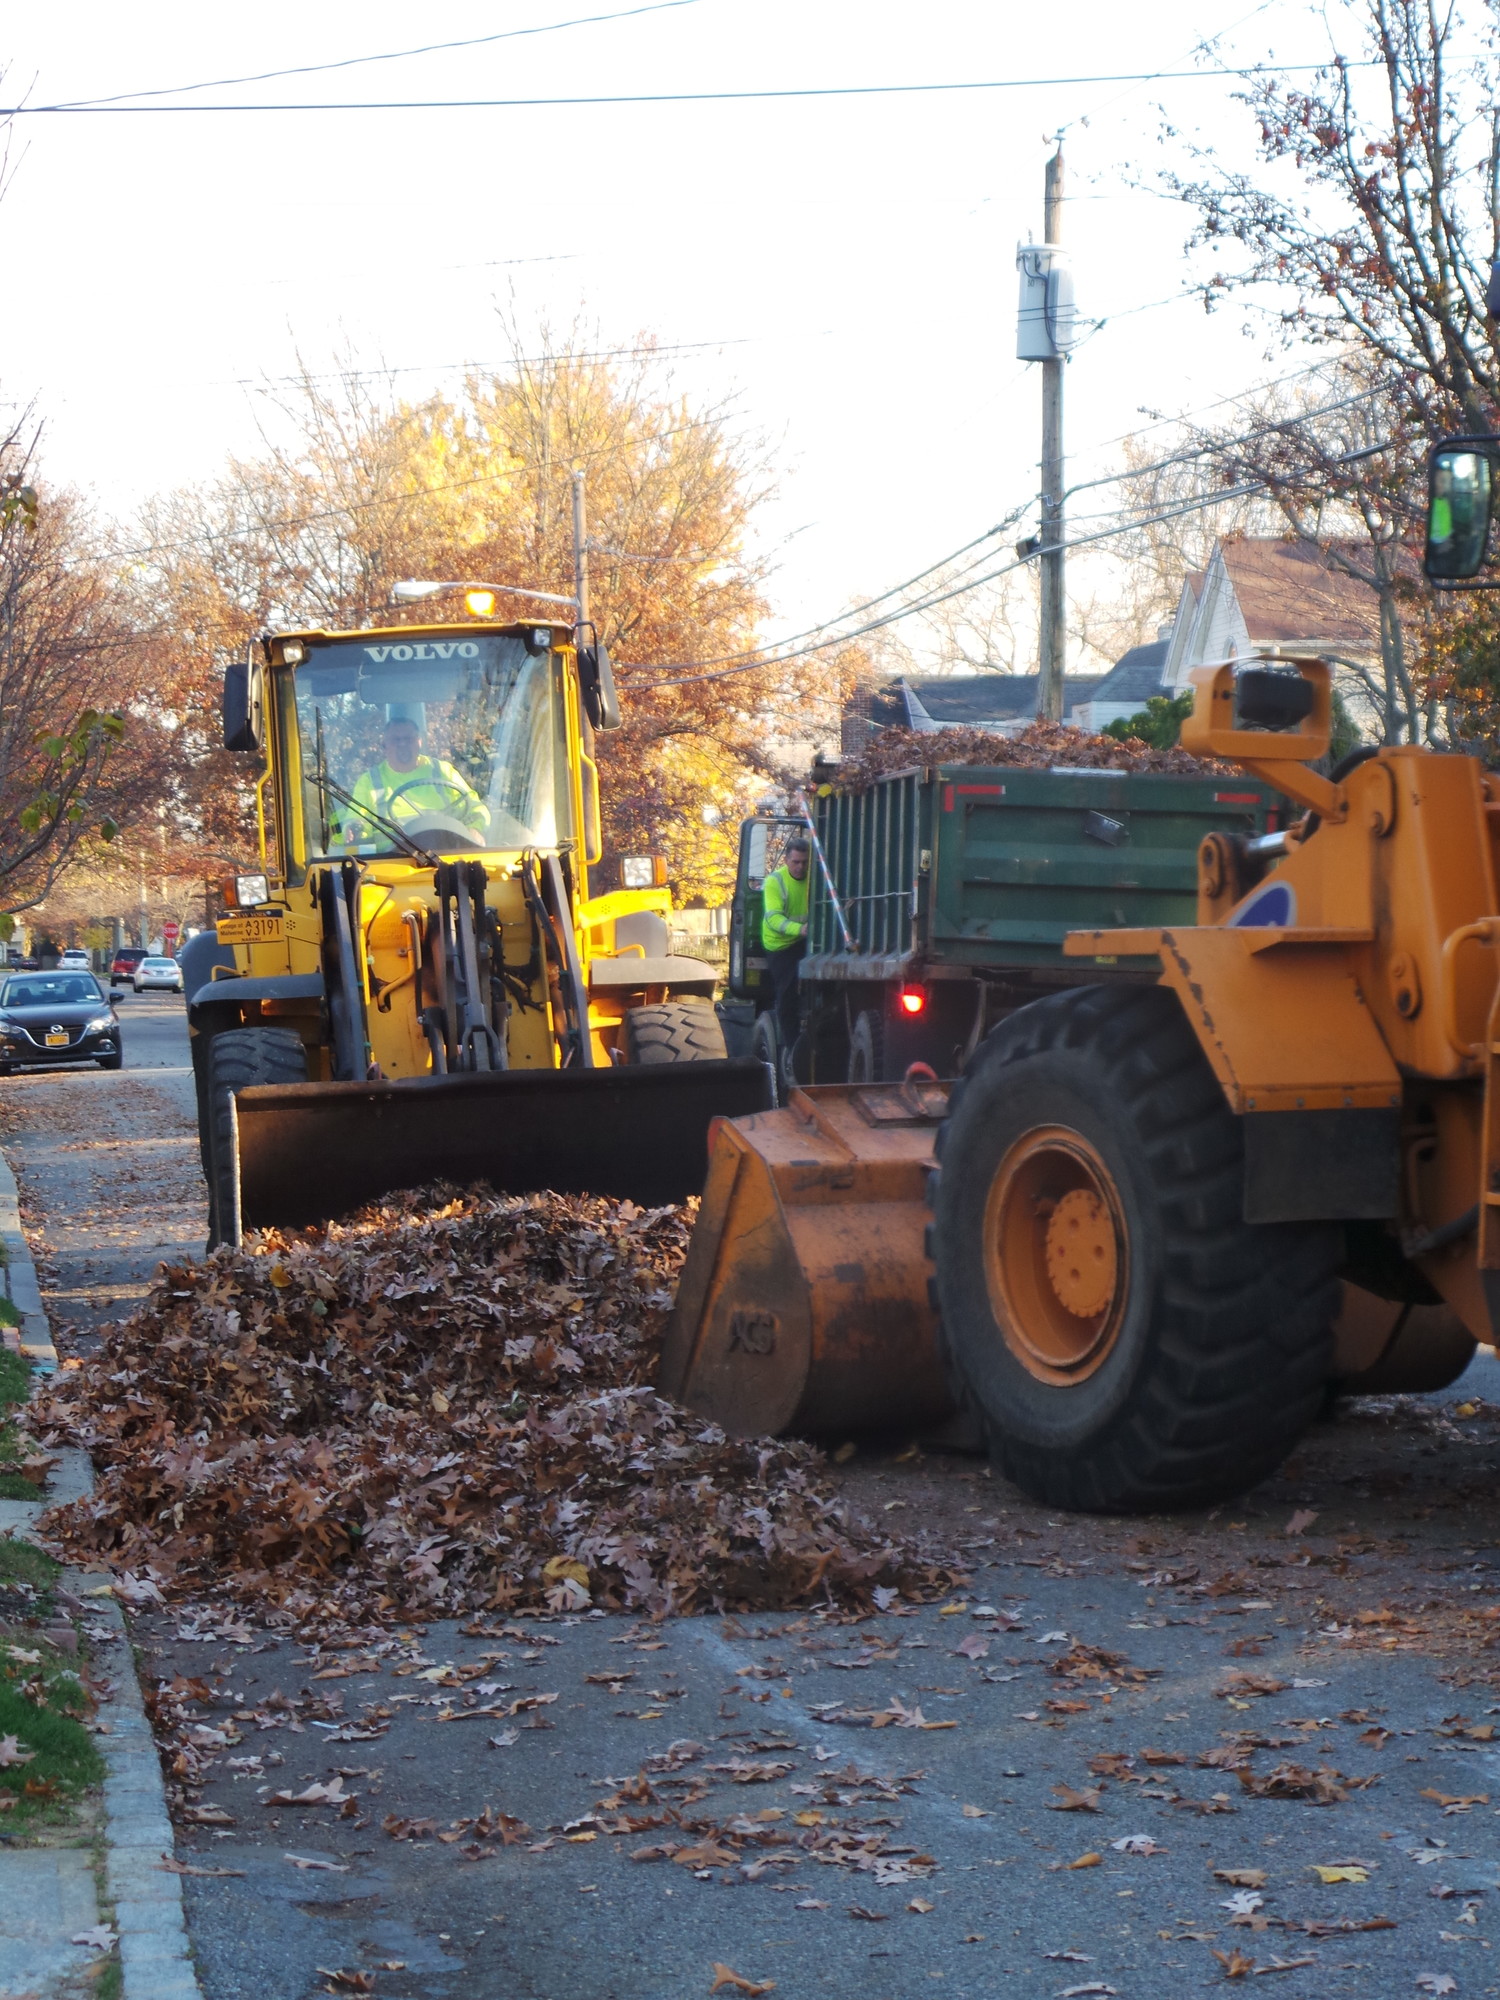 DPW workers picked up small mountains of leaves last week as part of its fall cleanup.